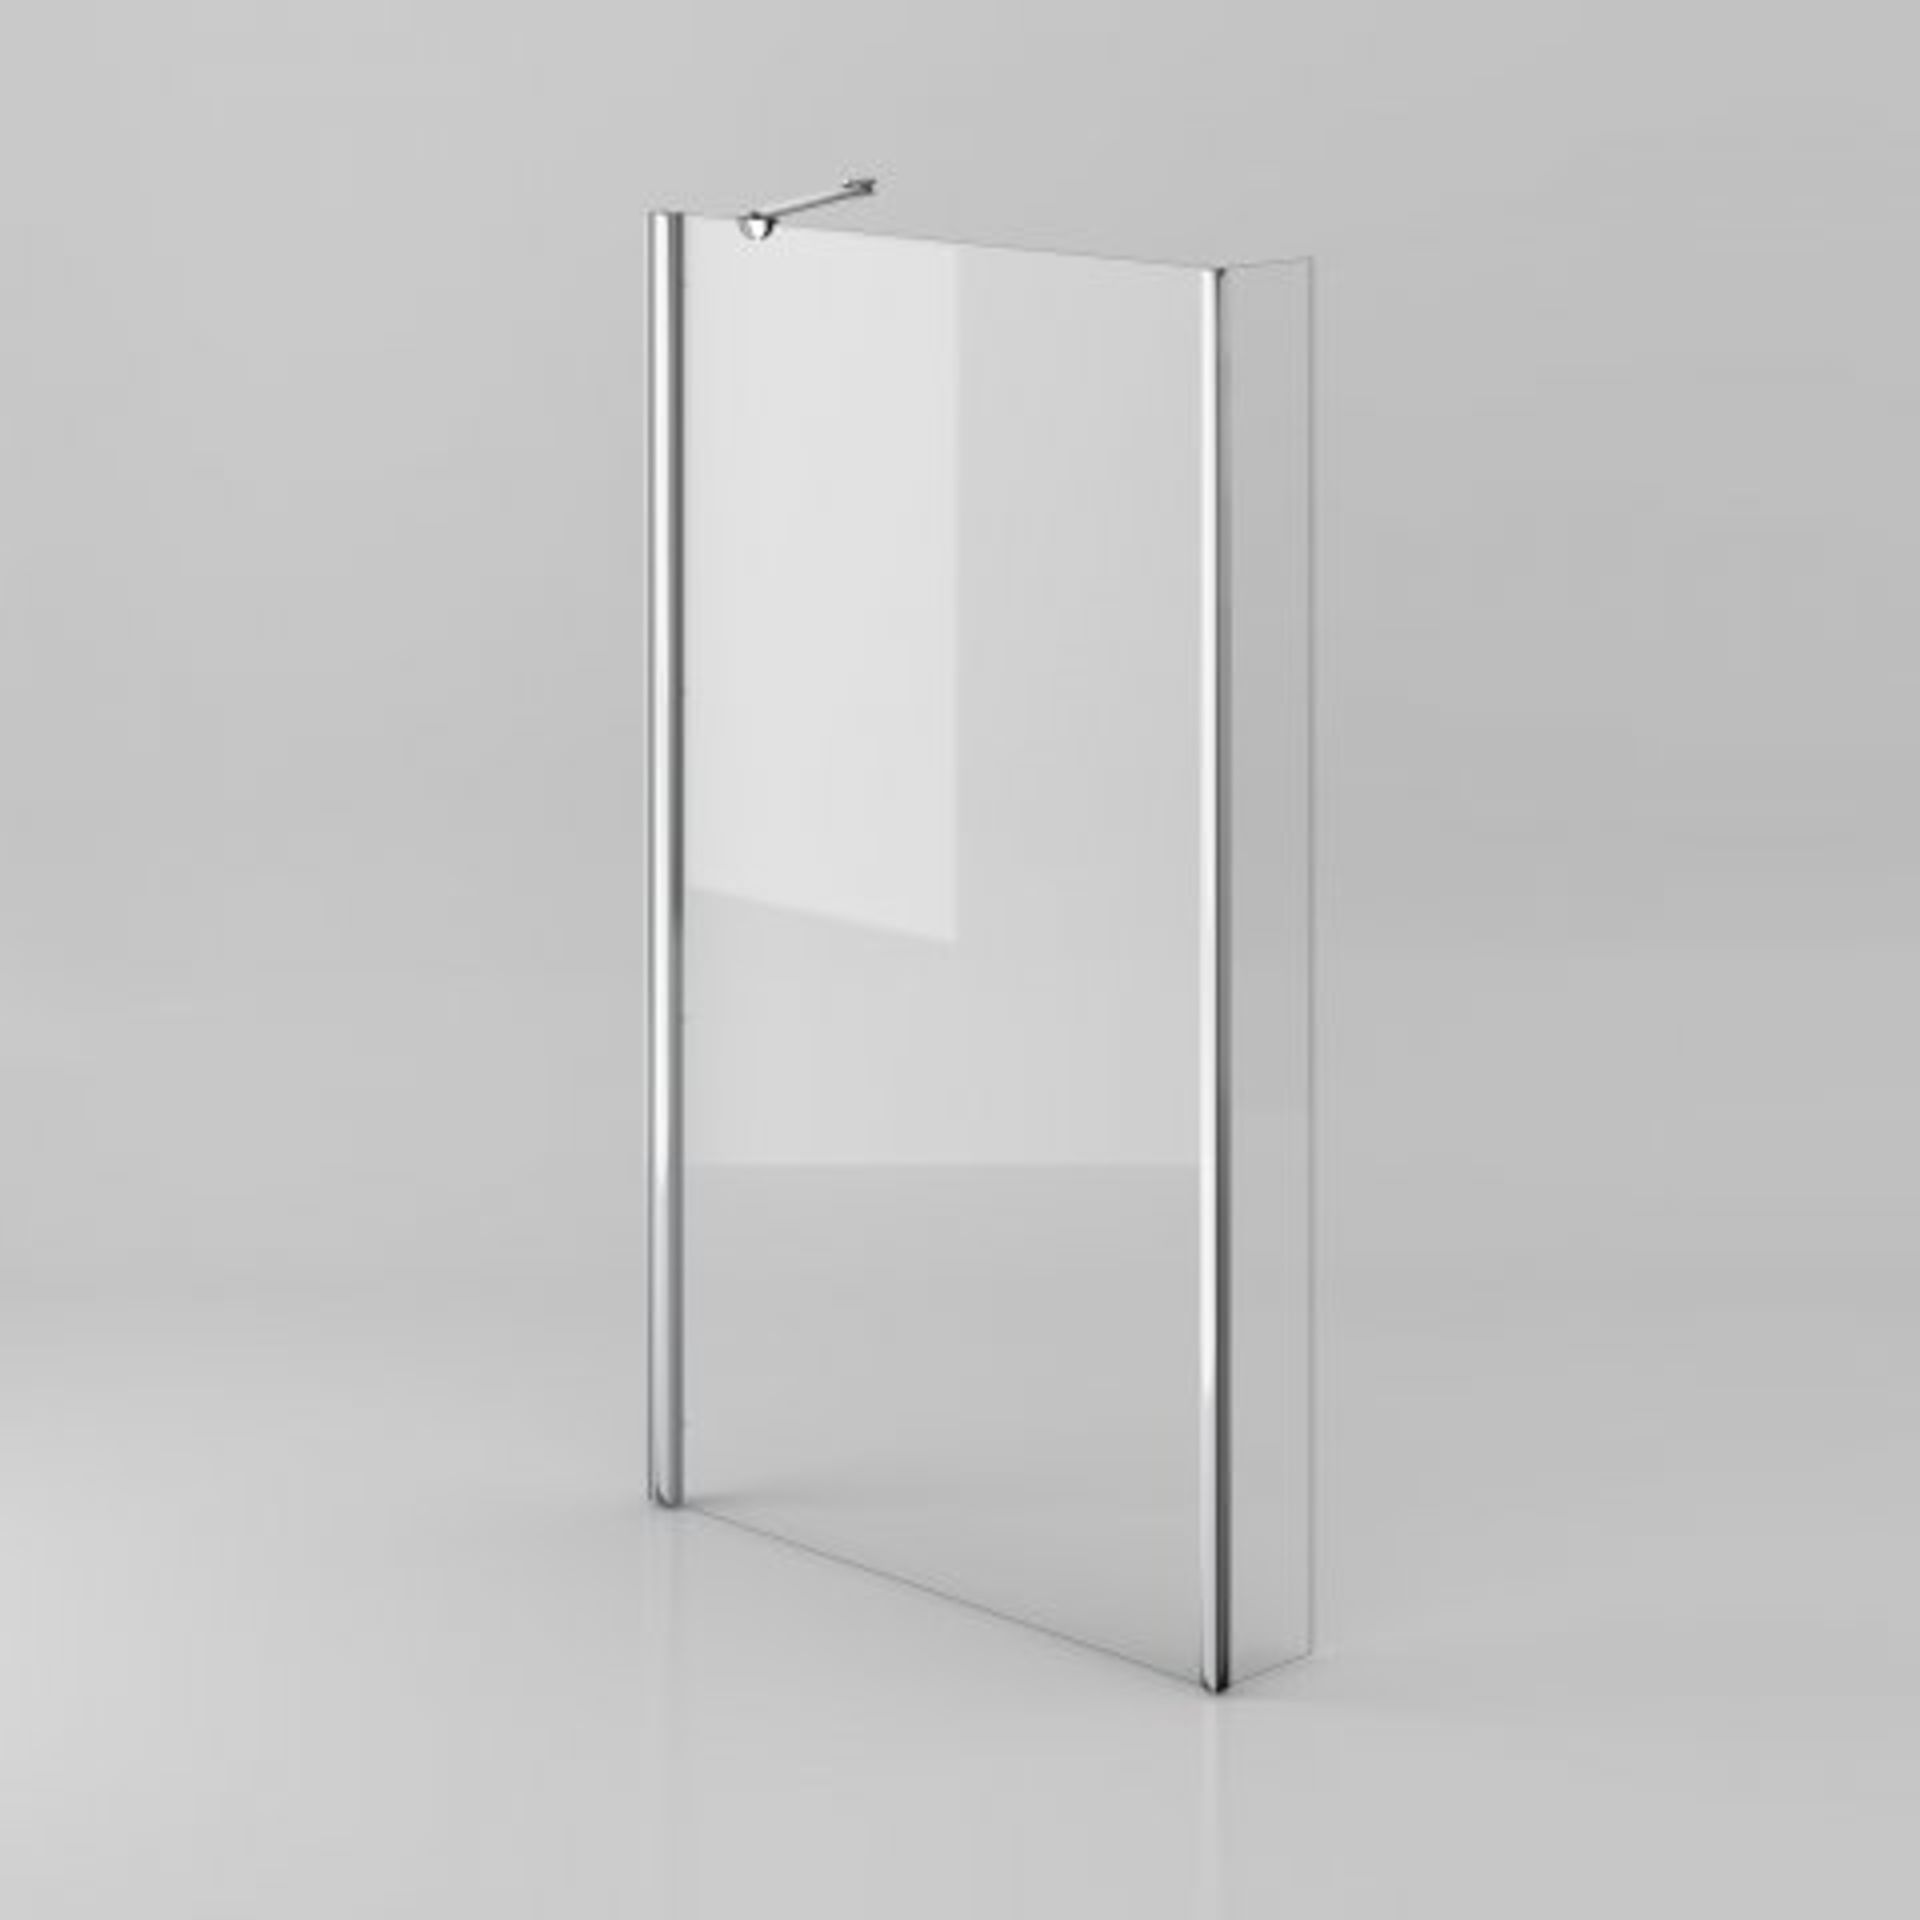 (T261) 700mm - Elements Bi Fold Shower Door RRP £299.99. Do you have an awkward nook or a tricky - Image 9 of 9